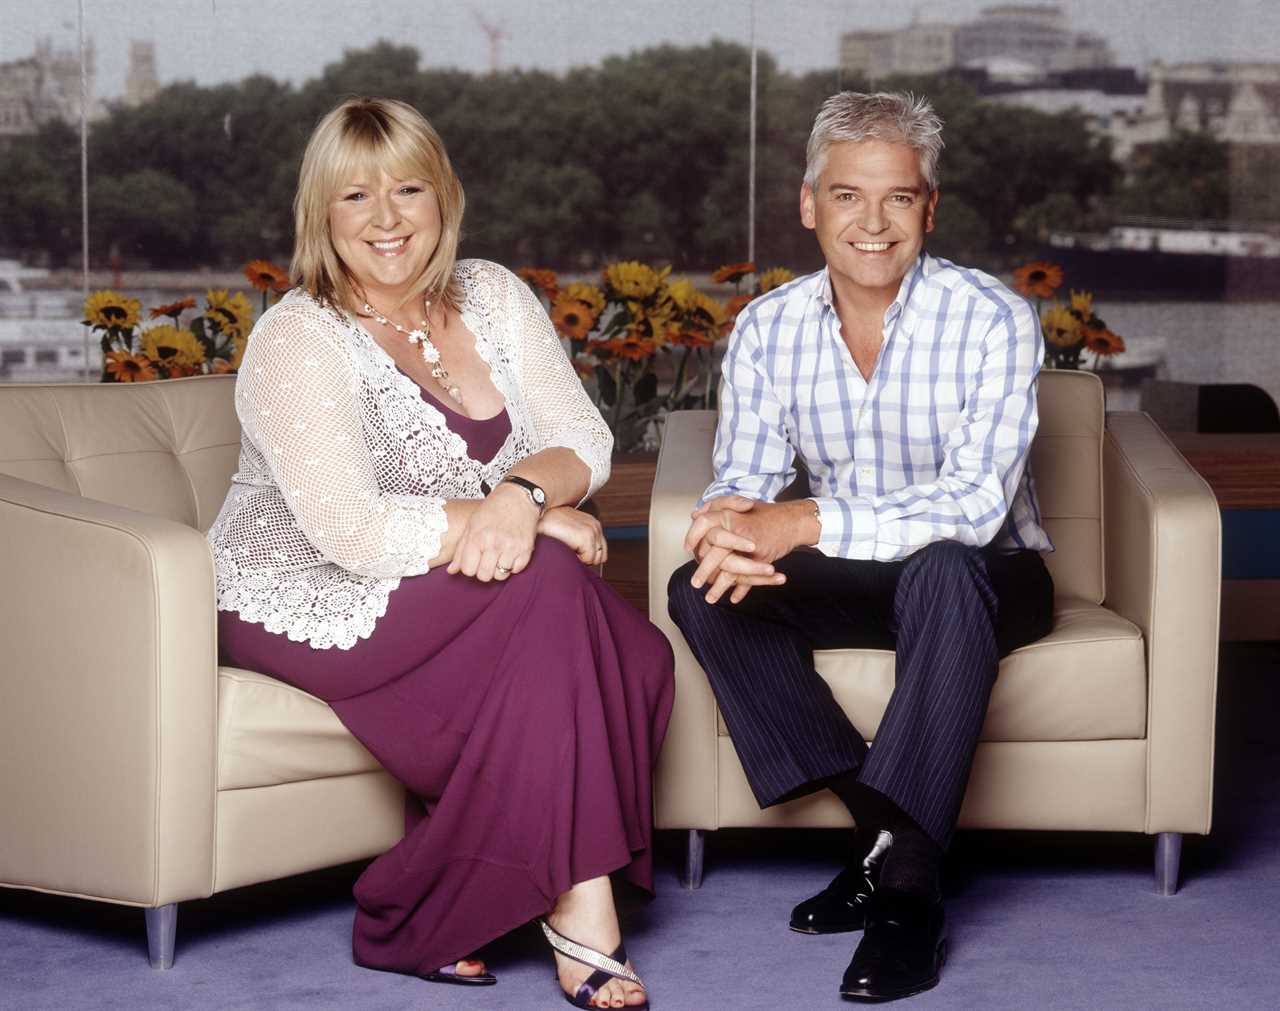 Fern Britton makes dig at ex-This Morning co-host Phillip Schofield amid ‘queue jump’ controversy